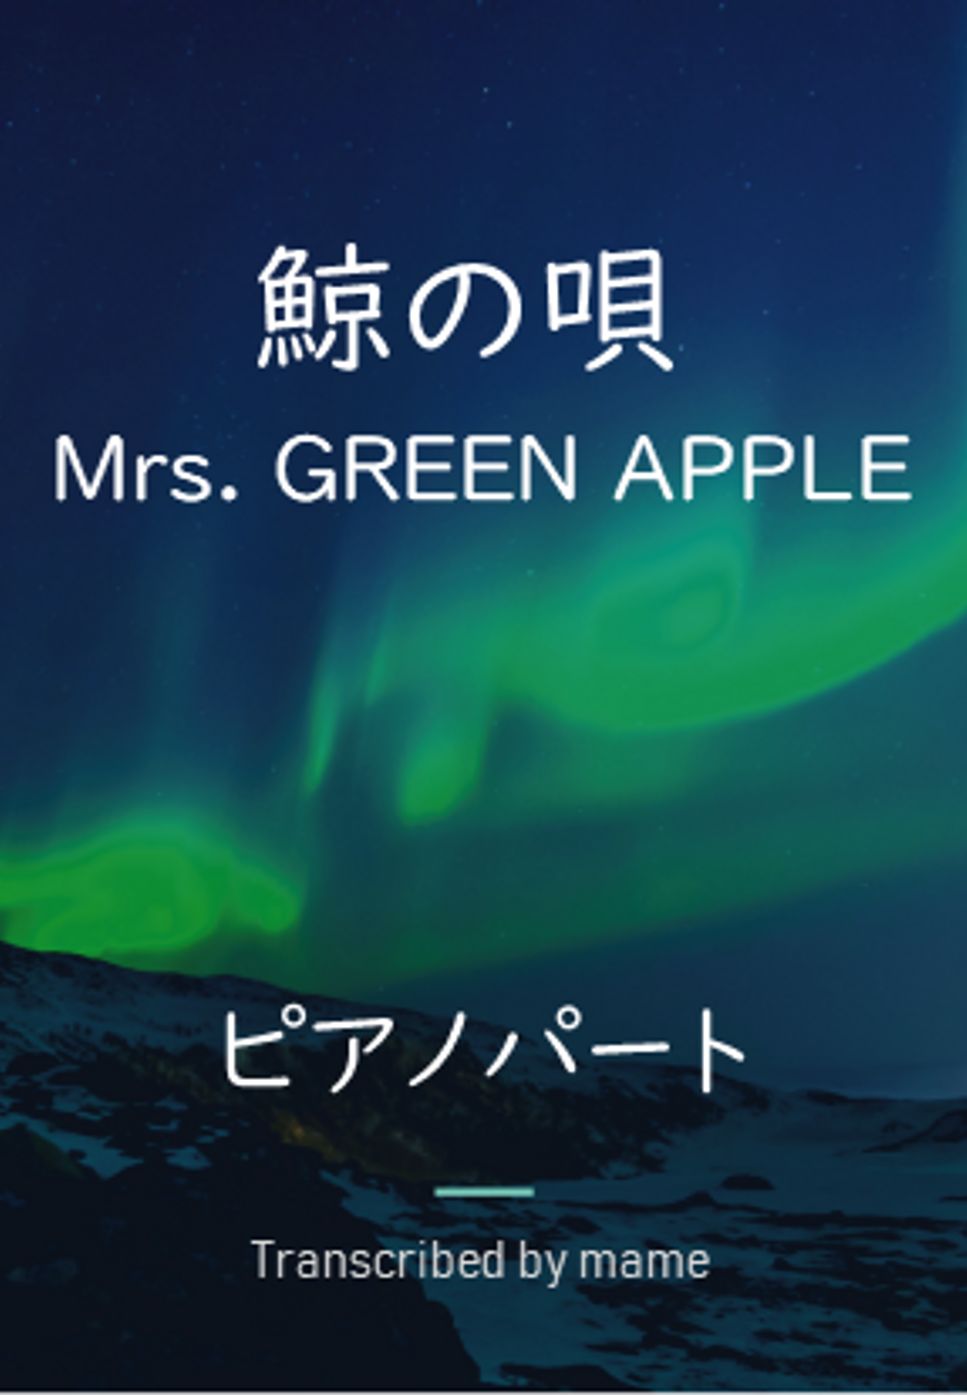 Mrs. GREEN APPLE - 鯨の唄 (piano part) by mame